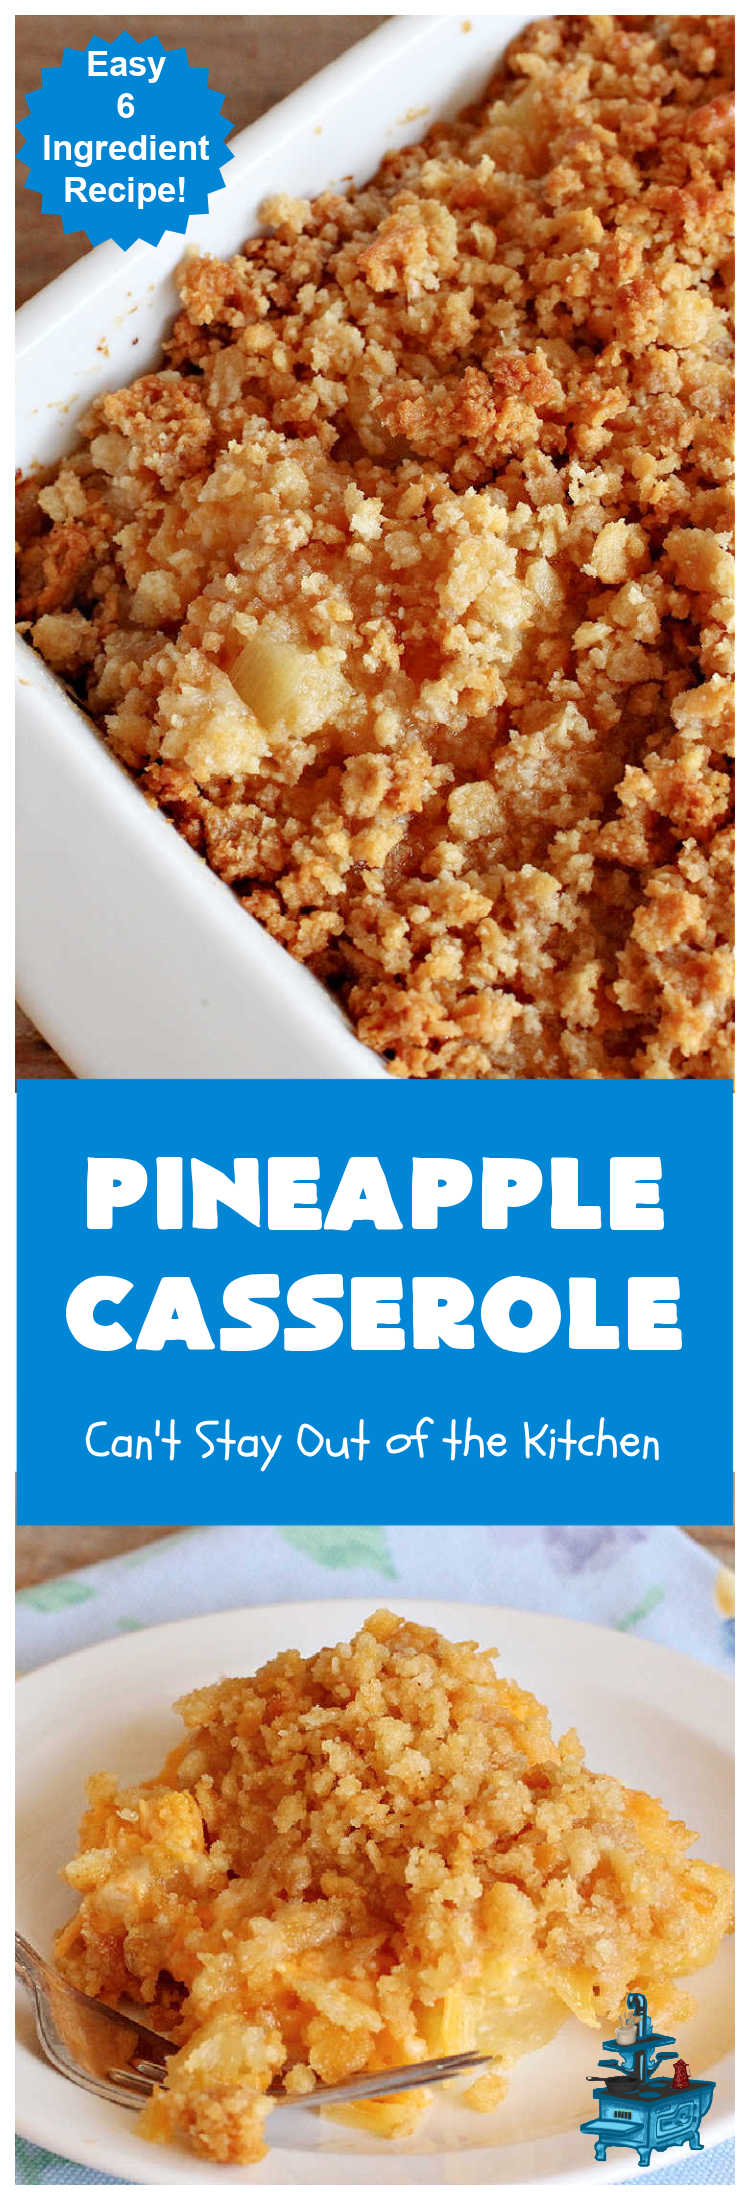 Pineapple Casserole | Can't Stay Out of the Kitchen | this spectacular deep-south #casserole is so mouthwatering it will rock your world! The combination of flavors with #pineapple #CheddarCheese & #RitzCrackers is absolutely irresistible. This is a great #casserole #SideDish for #holidays & company dinners like #Thanksgiving, #Christmas, #MothersDay, #FathersDay & special occasion dinners. Everyone loves this side dish & wants seconds! #Southern #6IngredientRecipe #BestPineappleCasserole #BestHolidaySideDish